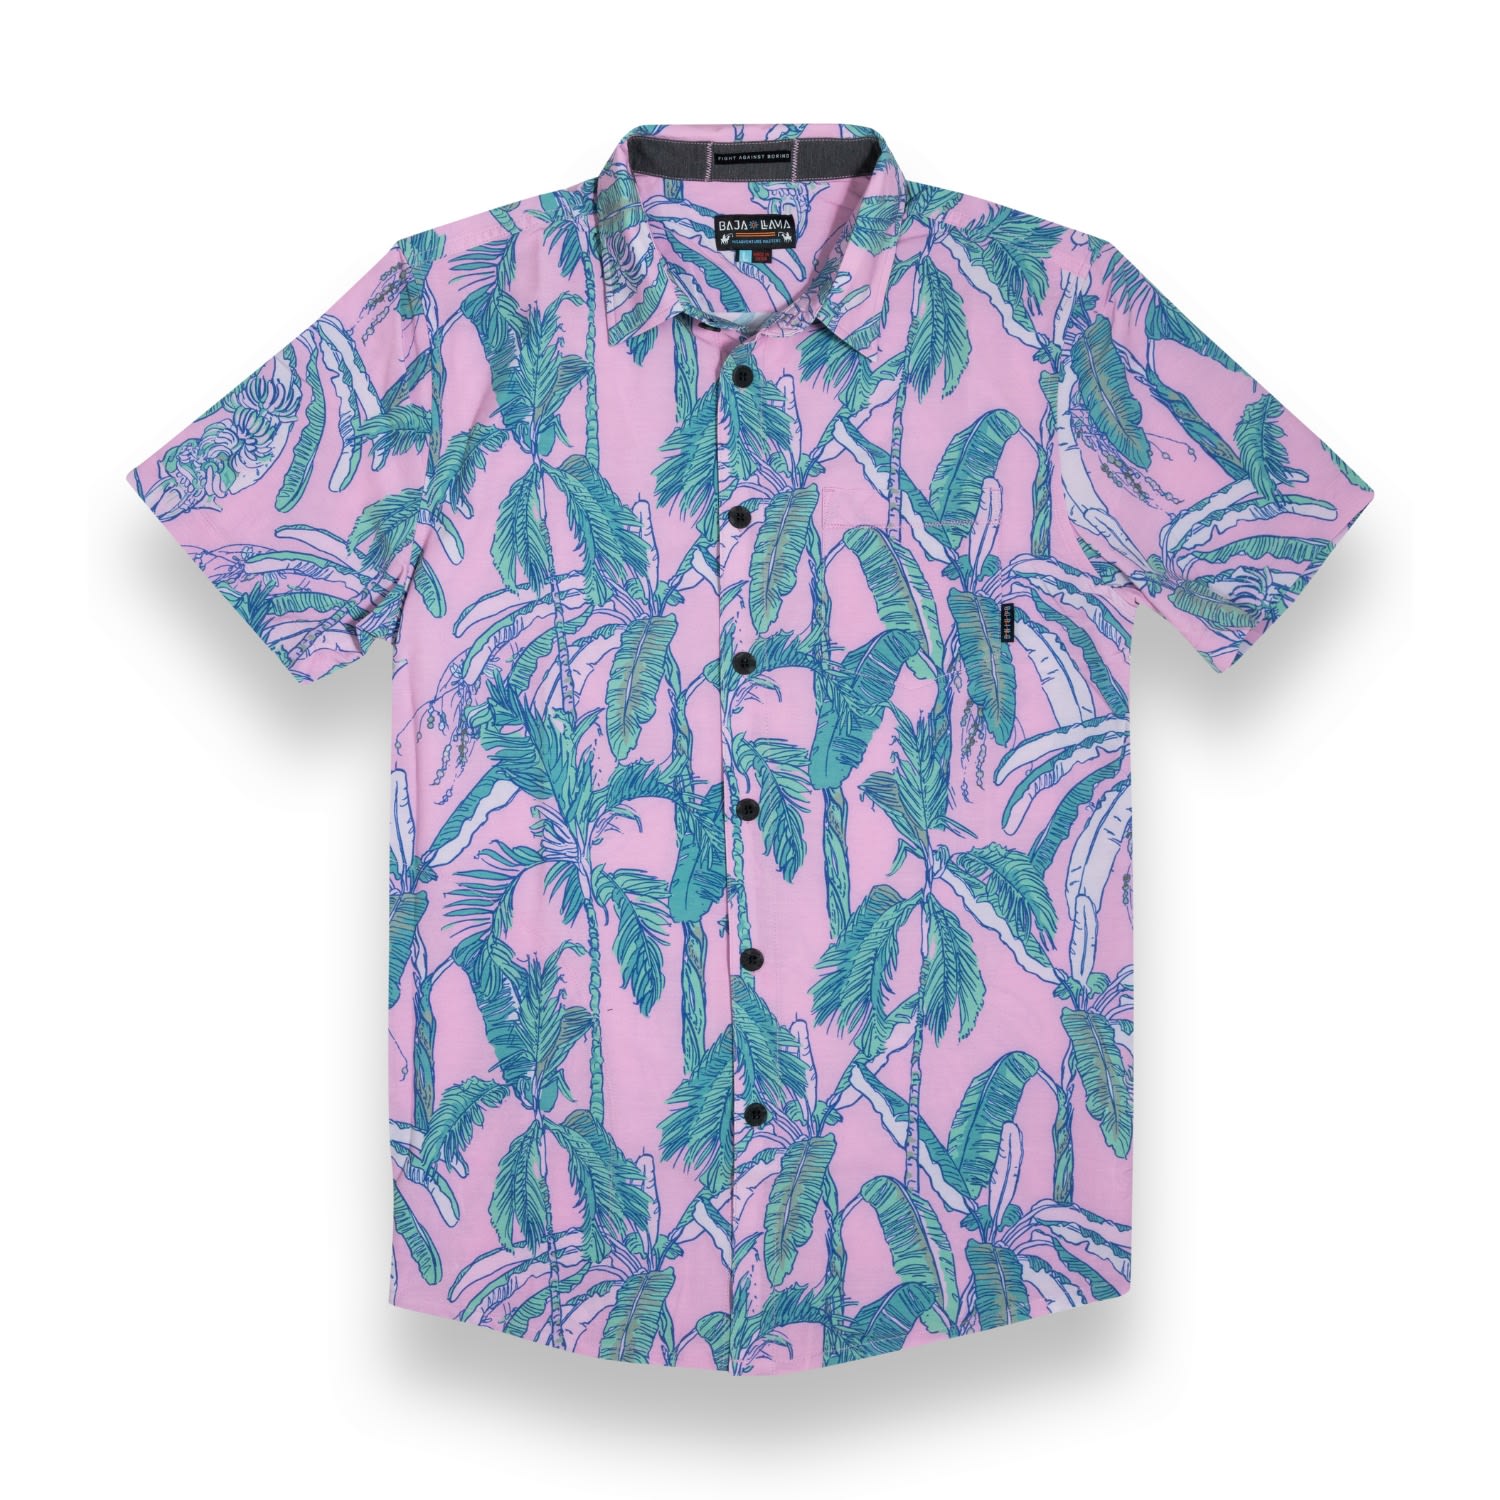 Men’s Pink / Purple All I See Is Pink - Vagabond Button Up Large Baja Llama